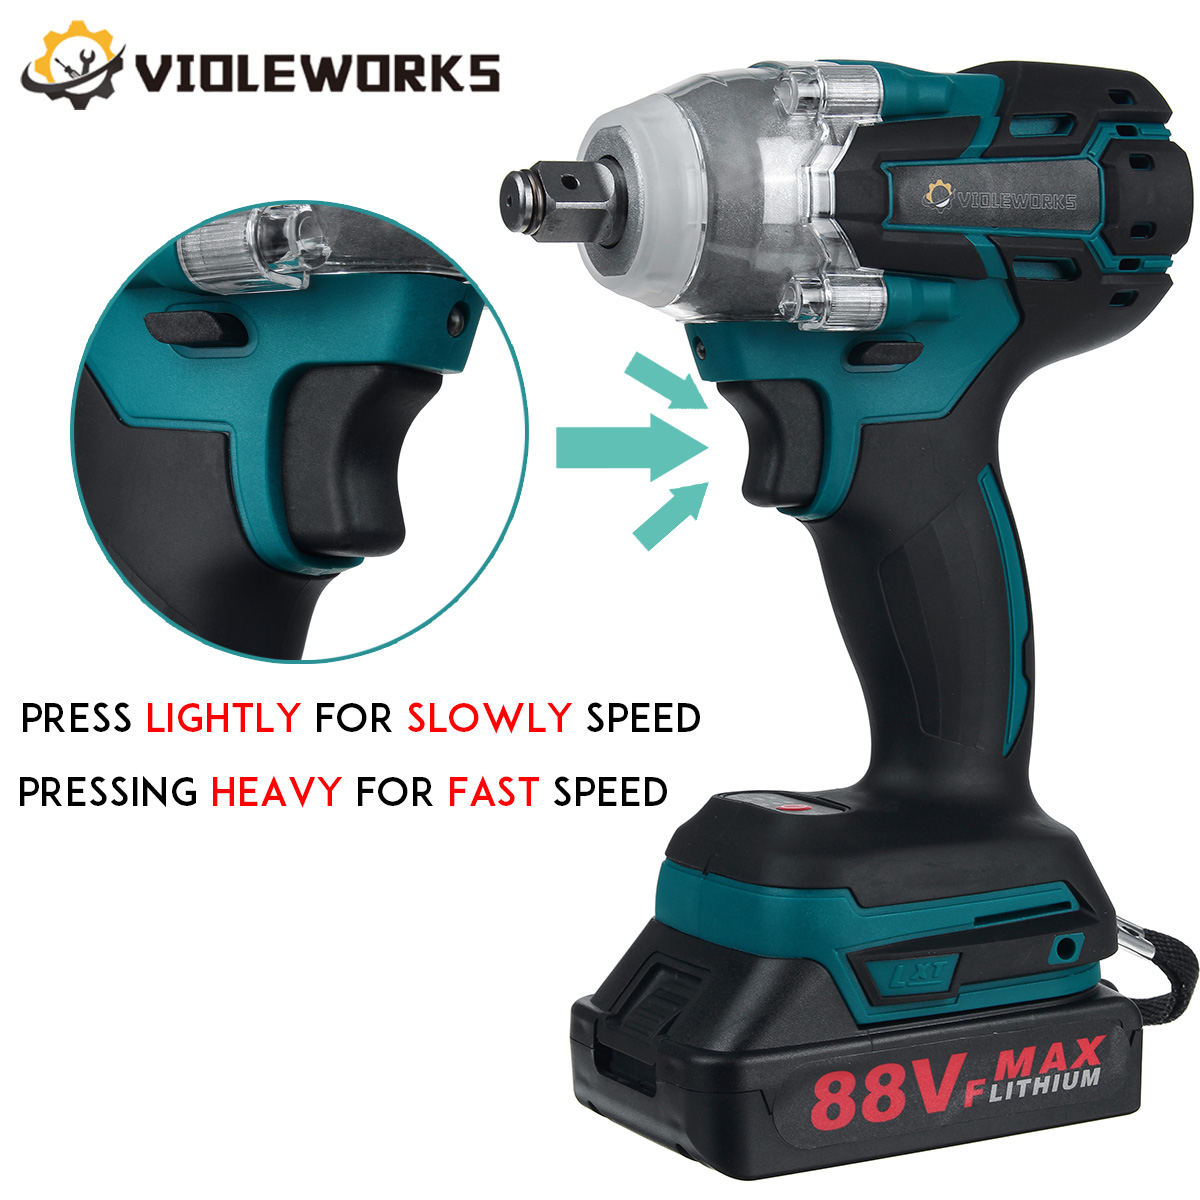 VIOLEWORKS-88VF-21V-280NM-1300mAh-Electric-Cordless-Impact-Wrench-Drill-Socket-W-1pc-or-2pcs-Battery-1791133-1